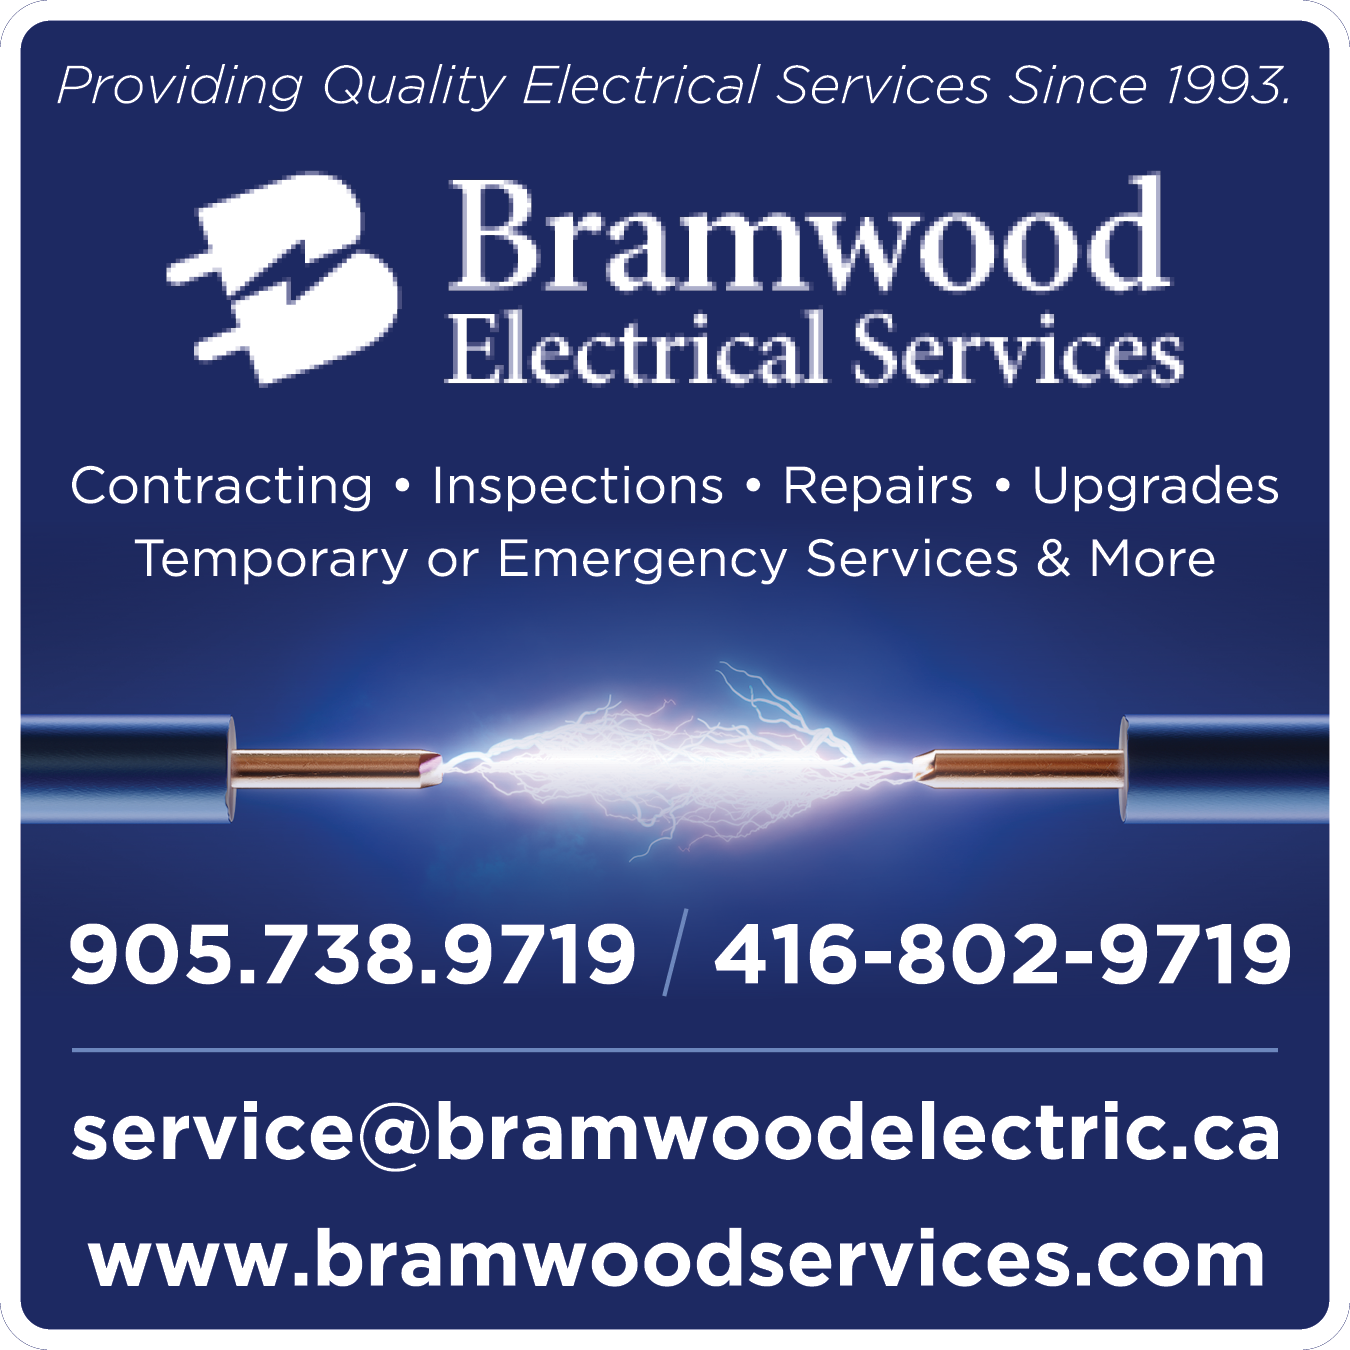 Bramwood Electrical Services